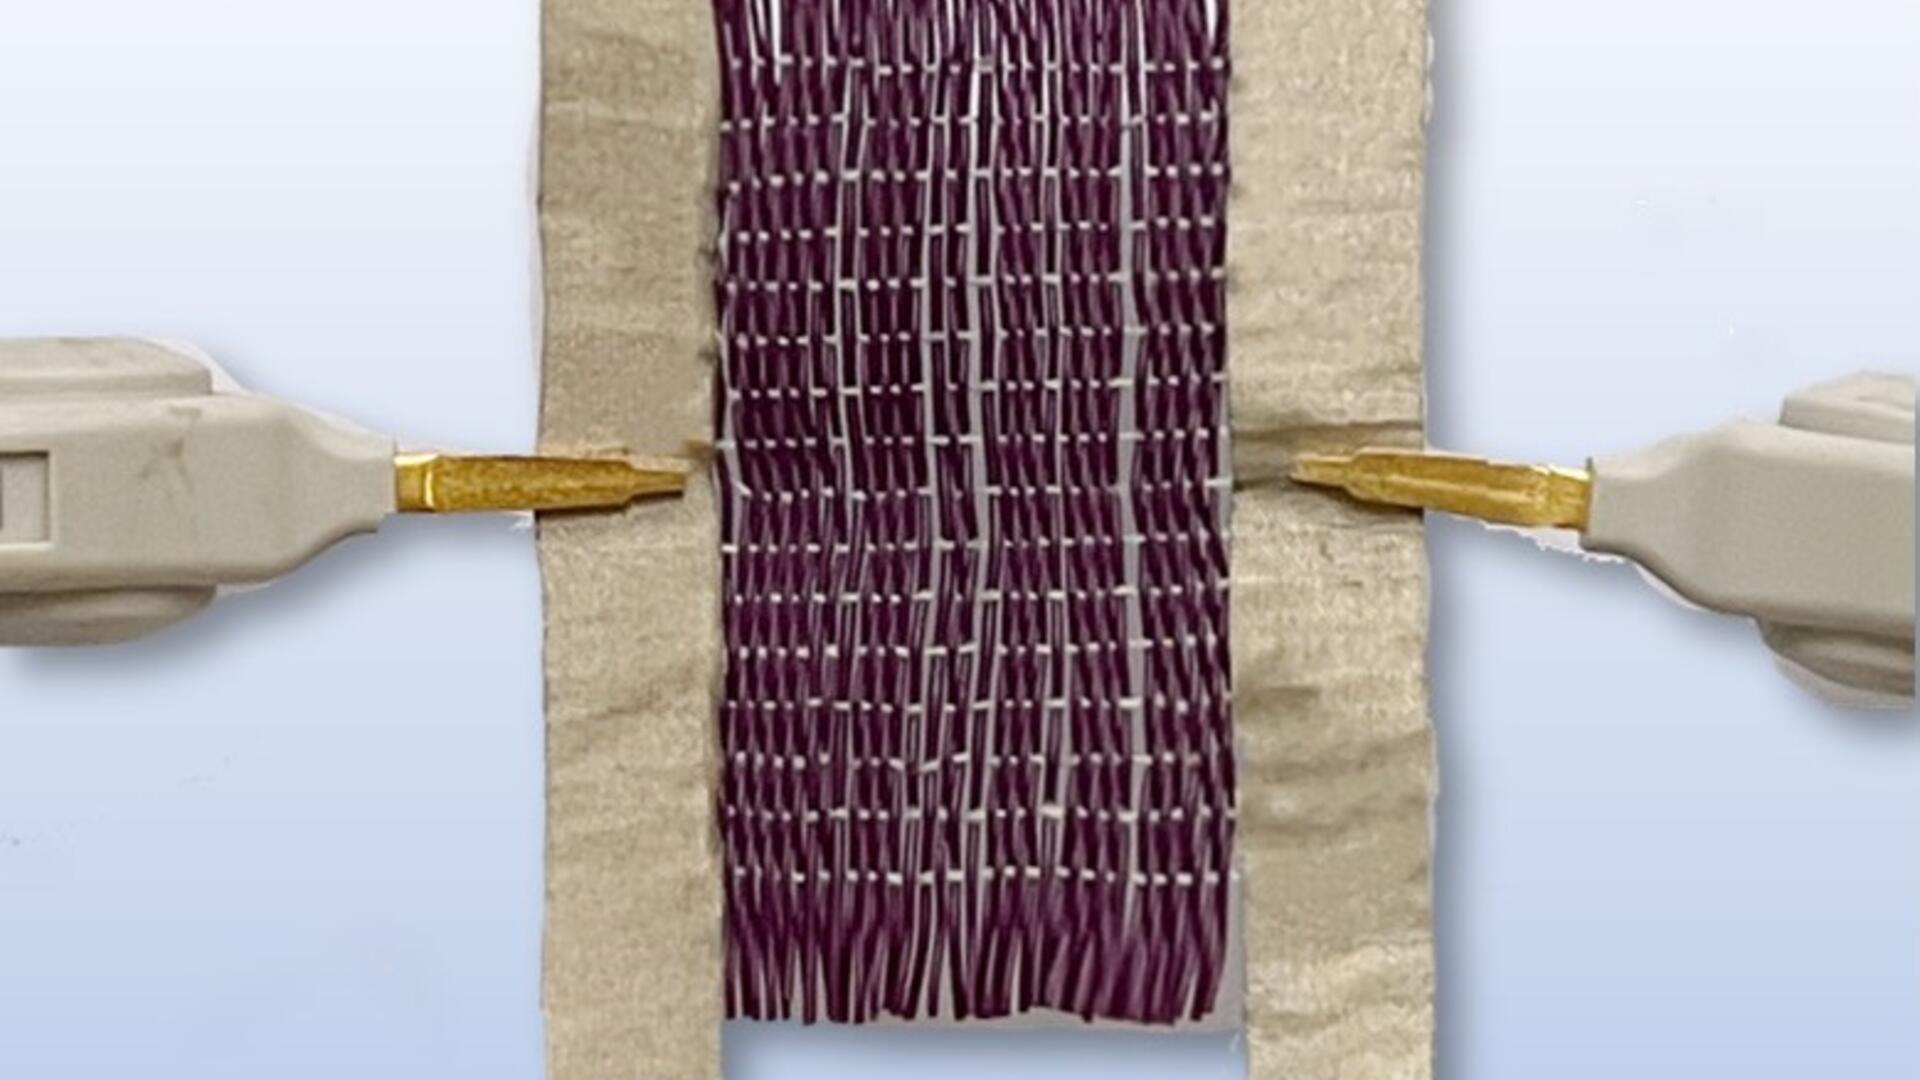 Woven smart fabric responding to electricity.